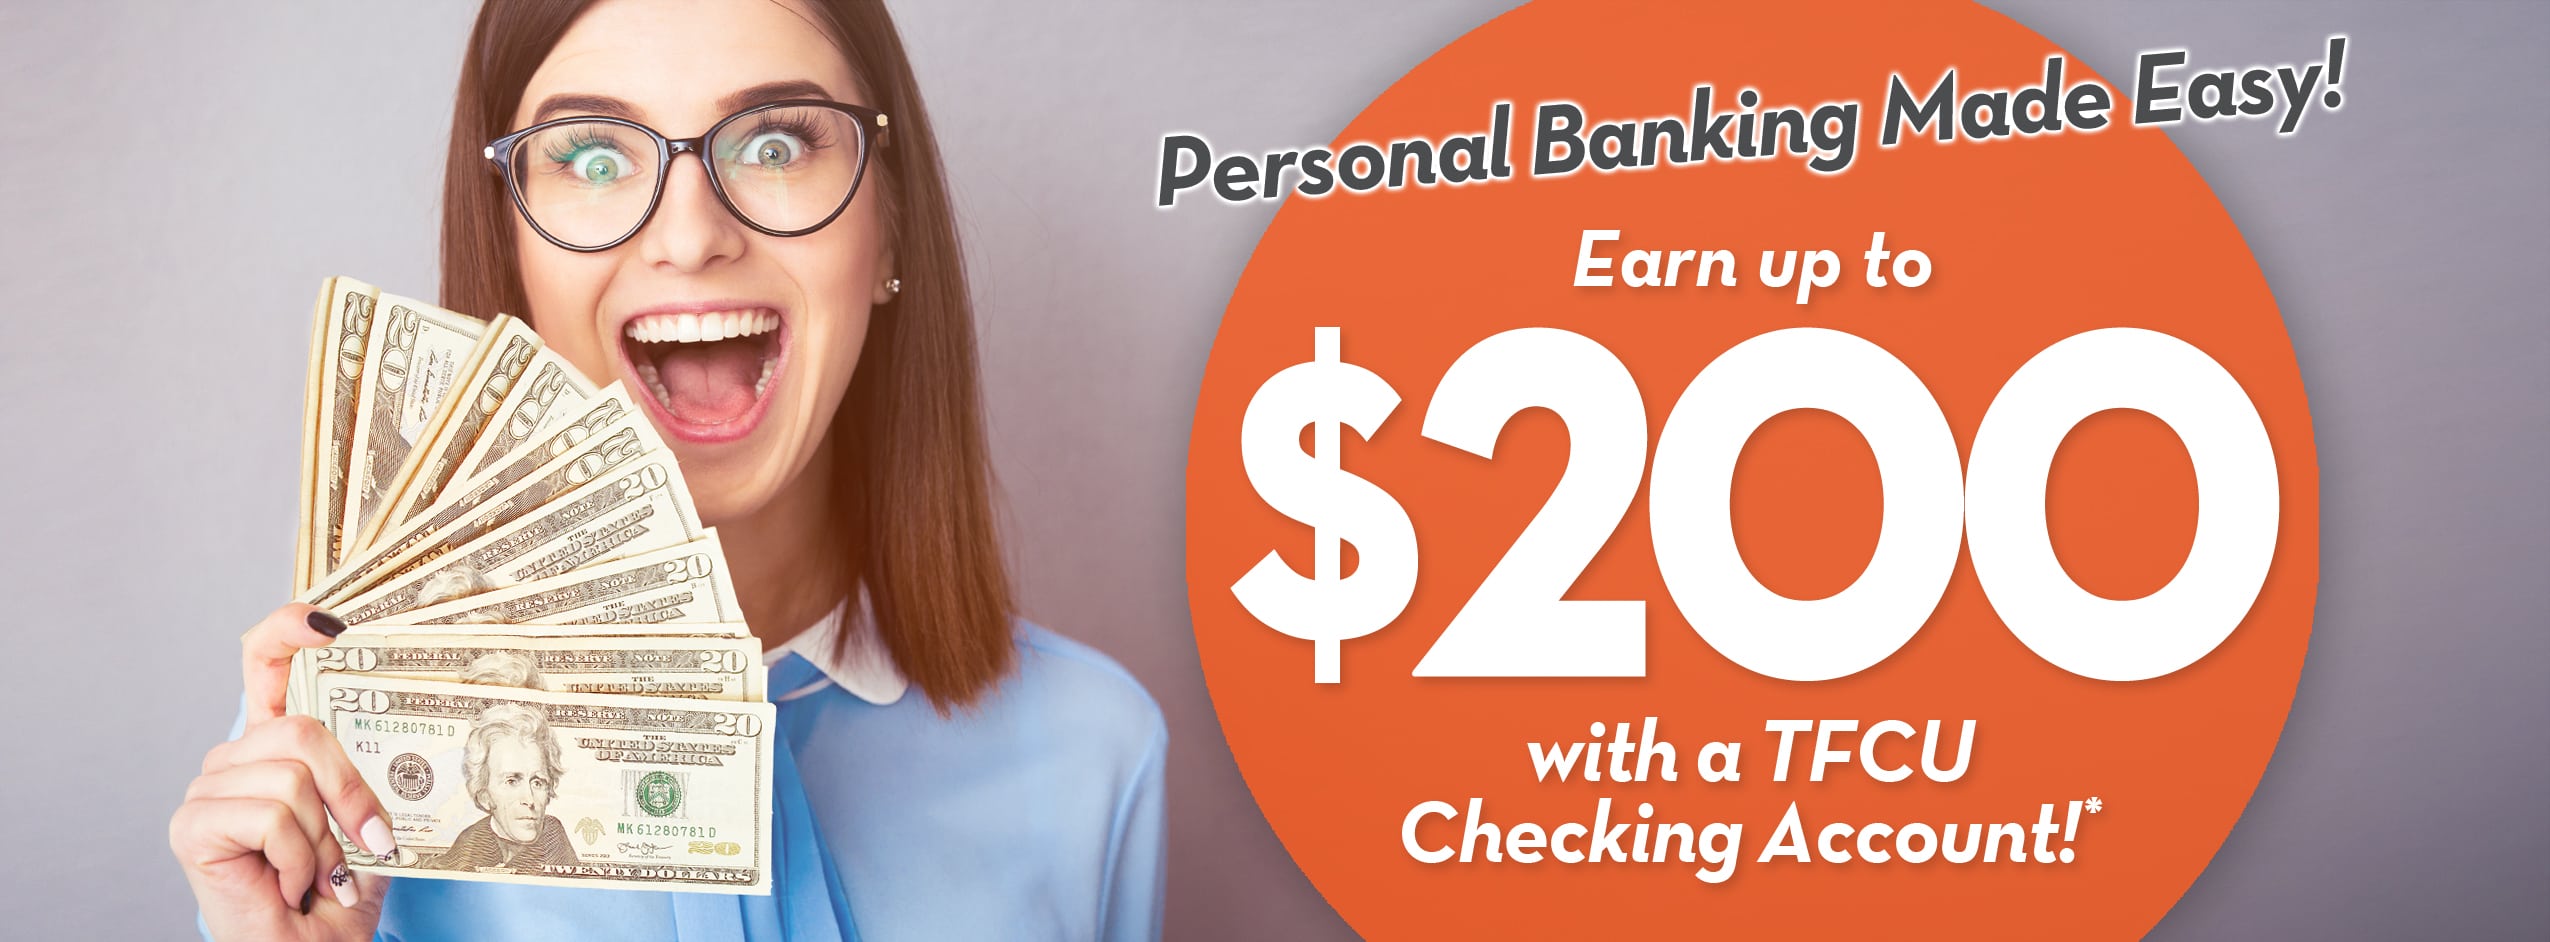 [MA, Bristol County only] Taunton Federal Credit Union 350 Checking